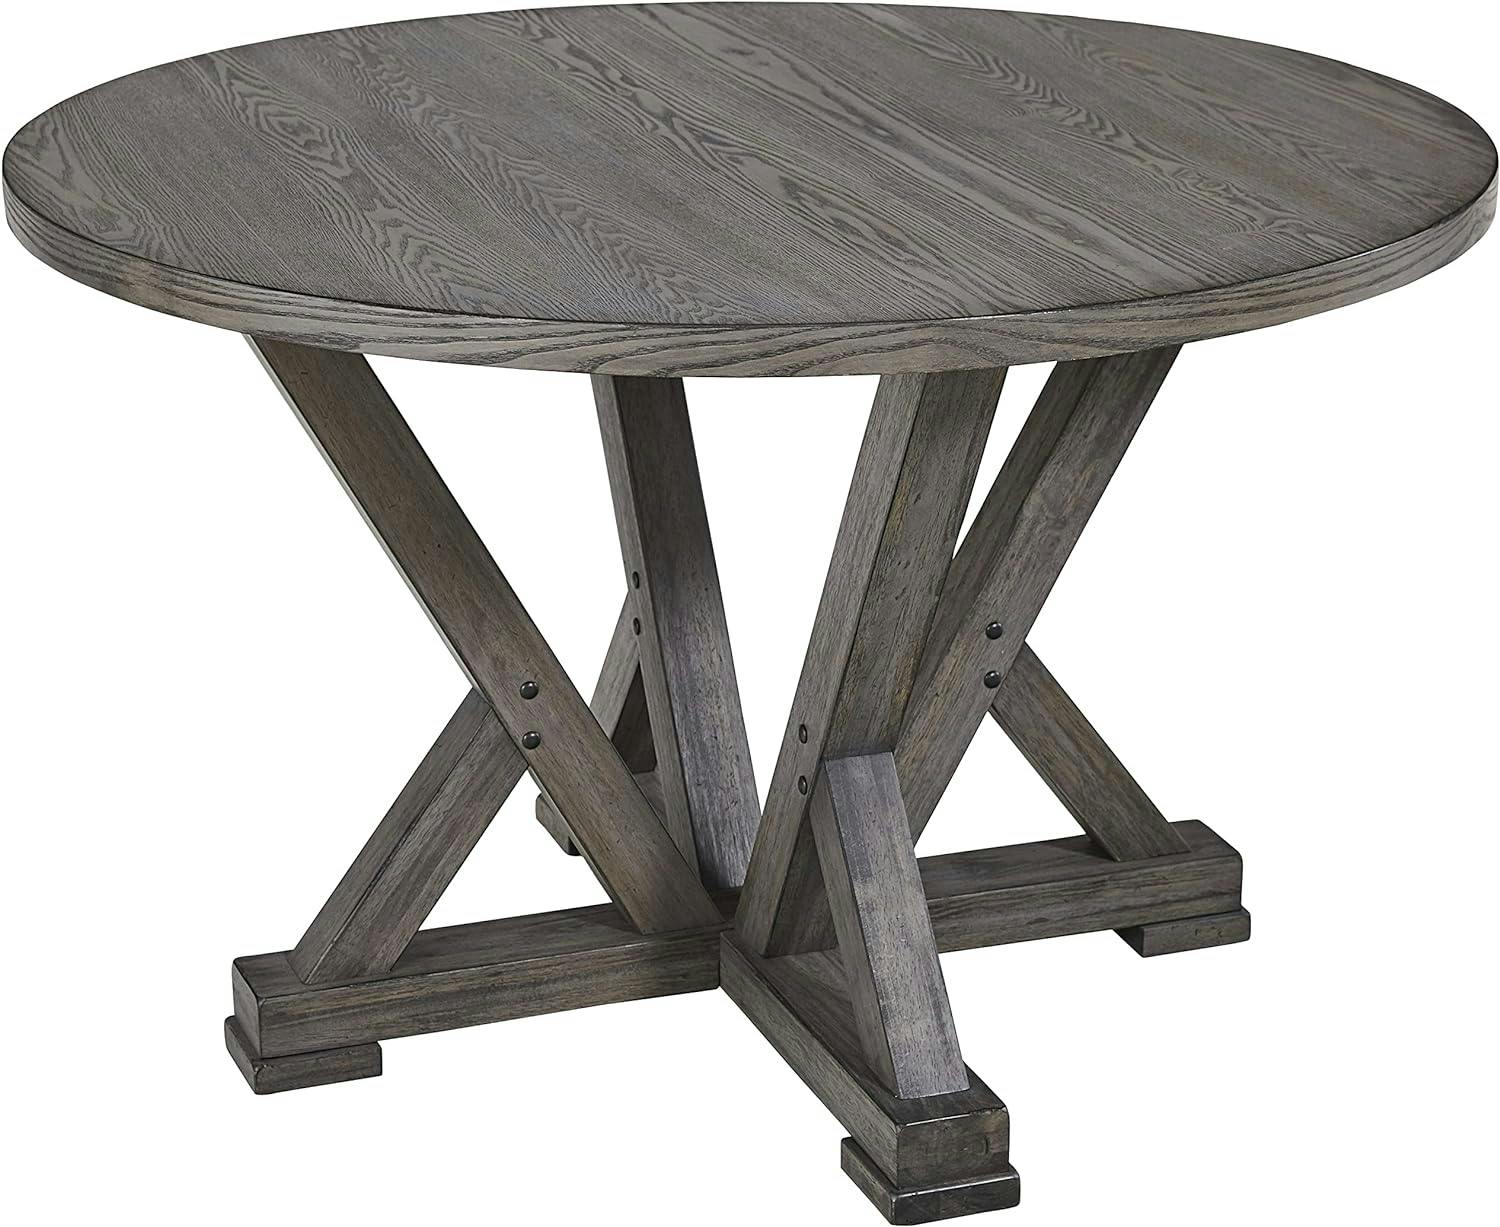 Transitional Harbor Gray Round Wood Dining Table, Seats 4